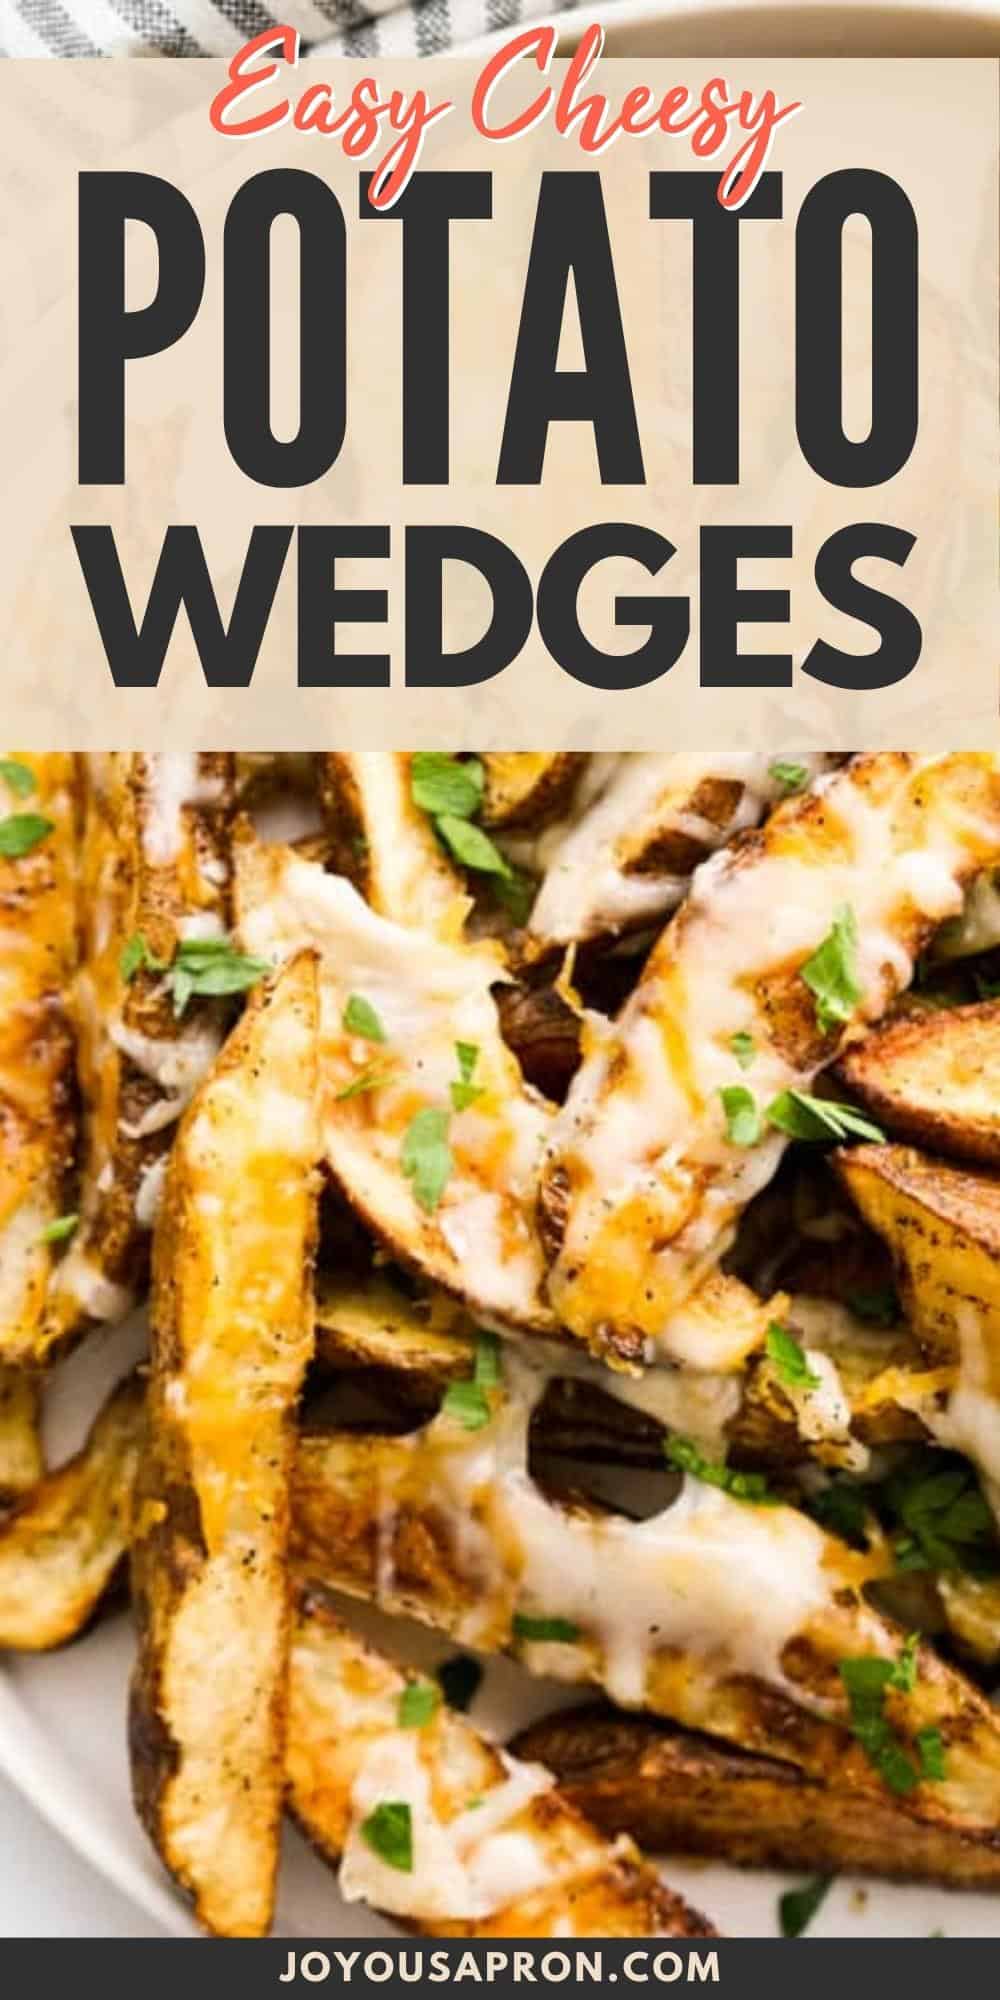 Cheesy Potato Wedges - Crunchy on the outside and soft on the inside, these seasoned potato wedges are baked with gooey melted cheese. Yummy and easy potato fries side dish, perfect as appetizers as well! via @joyousapron